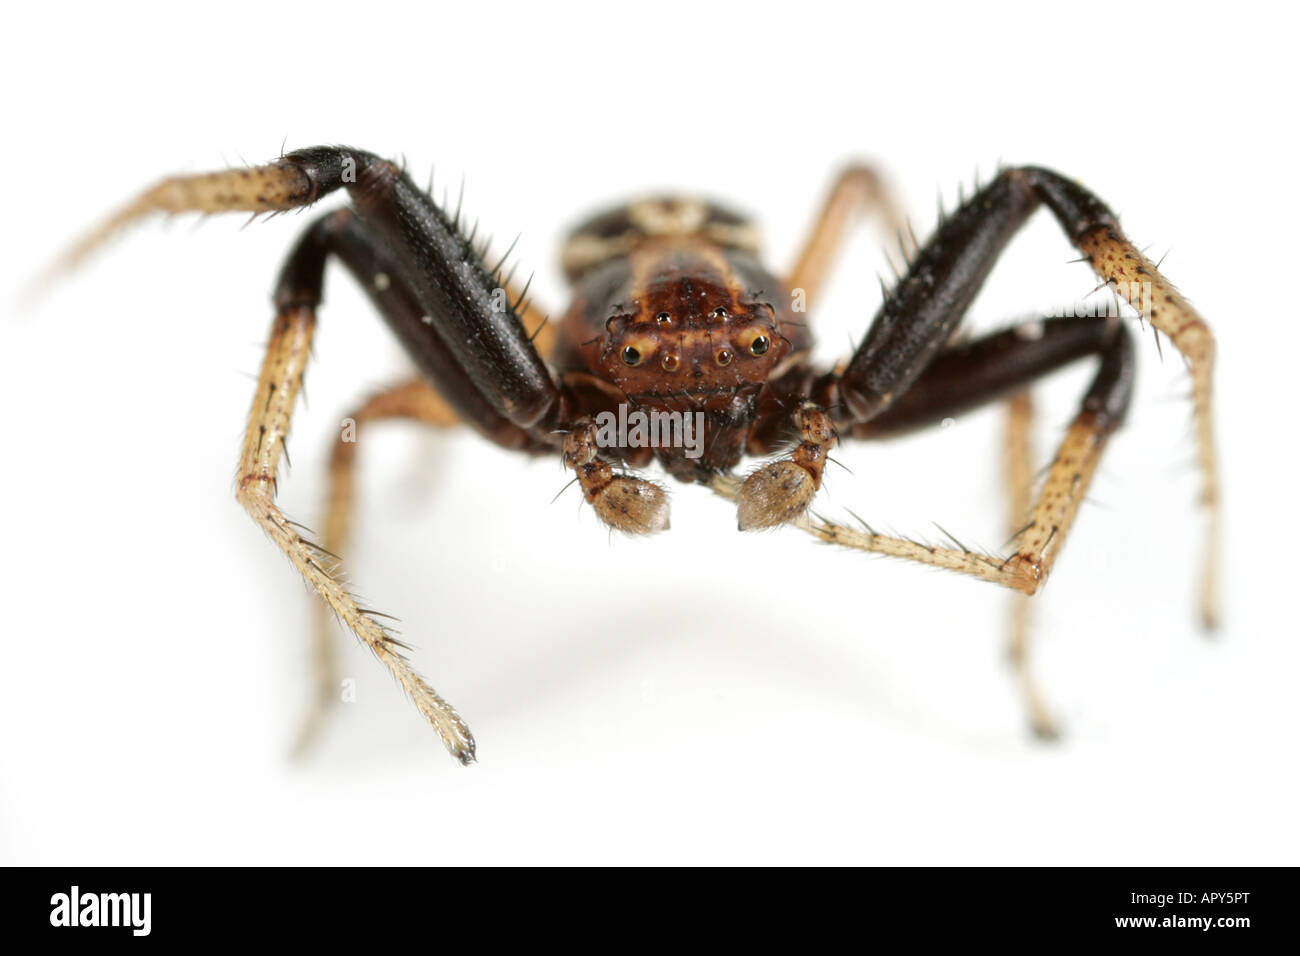 A male Crab spider, Xysticus ulmi. Thomisidae family. Head on view on white background. Stock Photo